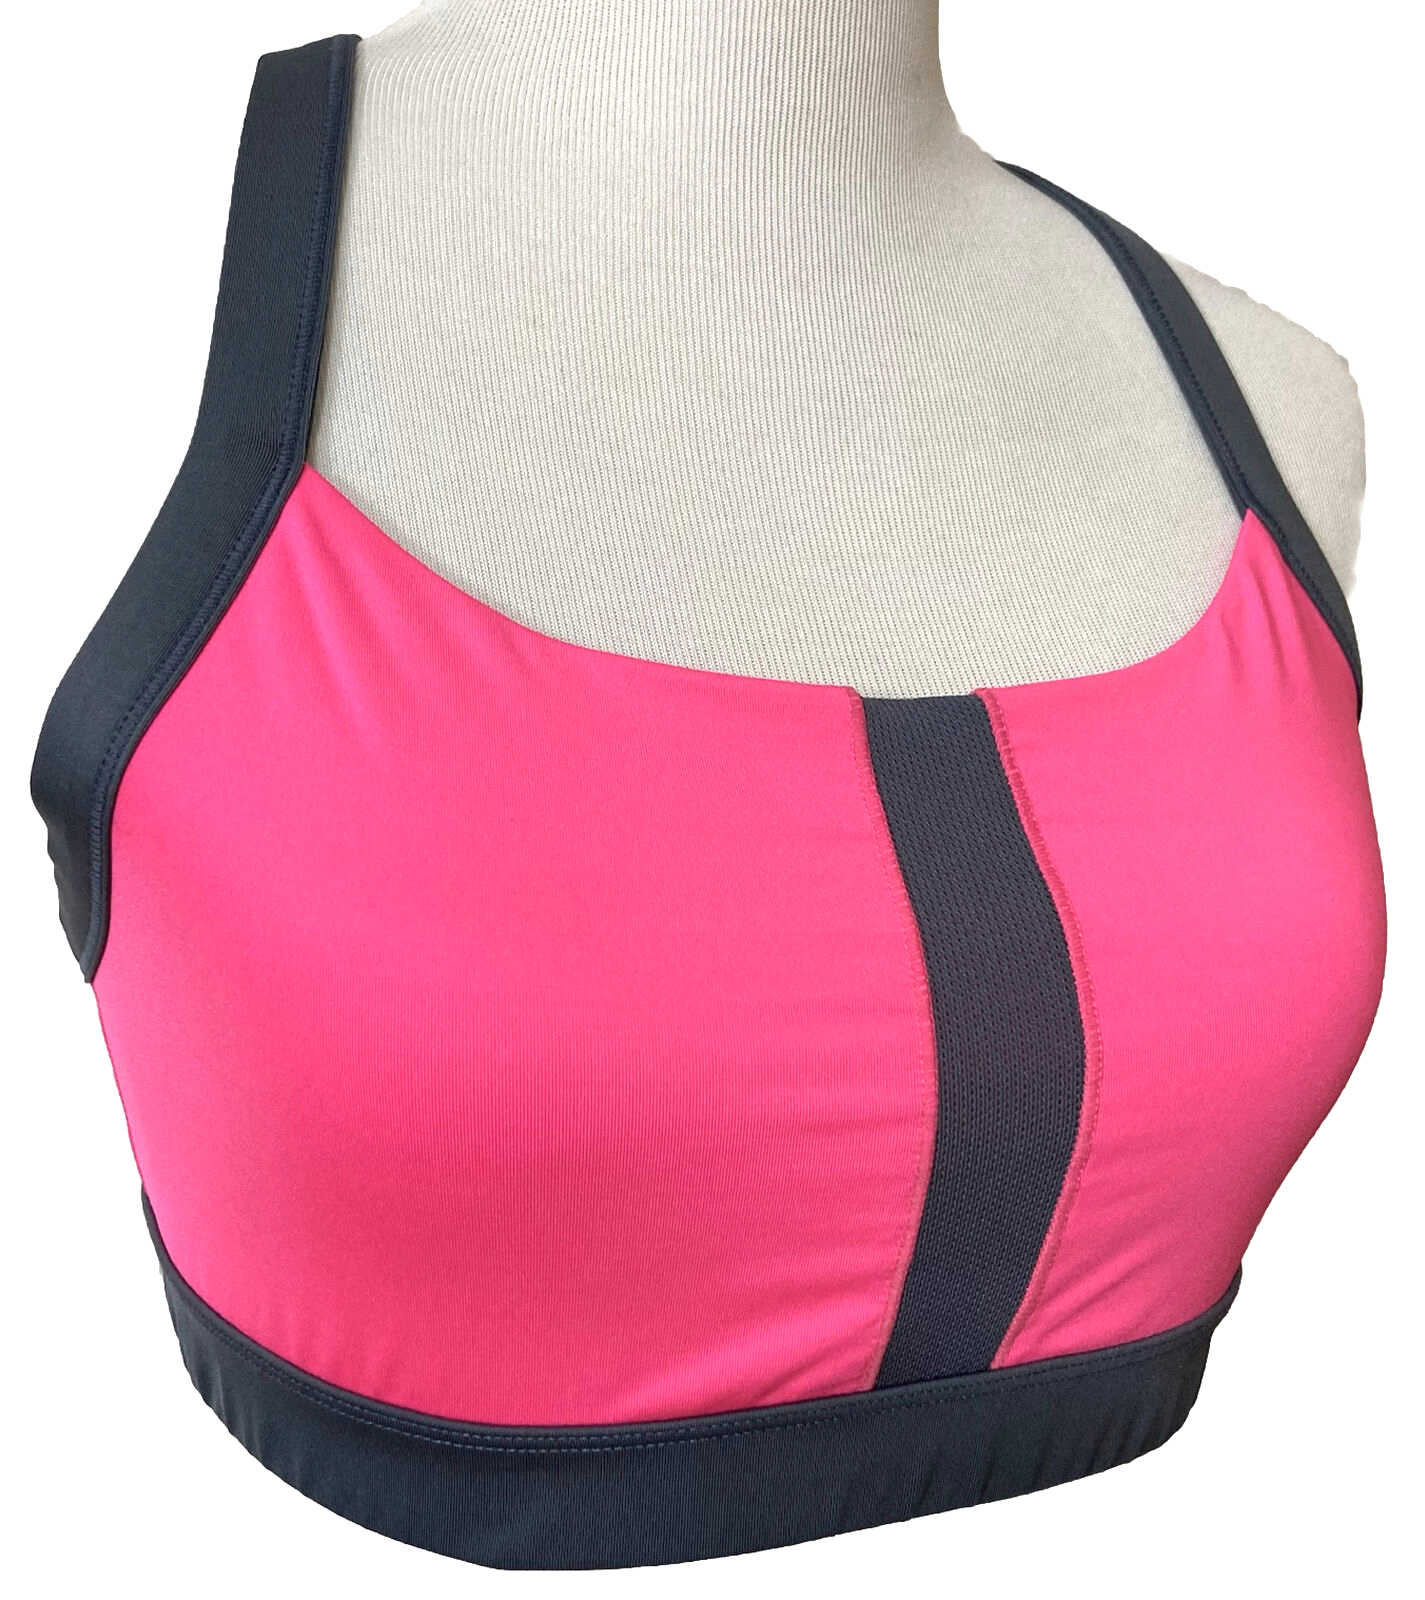 Primary image for Women's Champion Duo Dry Sports Bra Sz Large Light Support Bright Pink